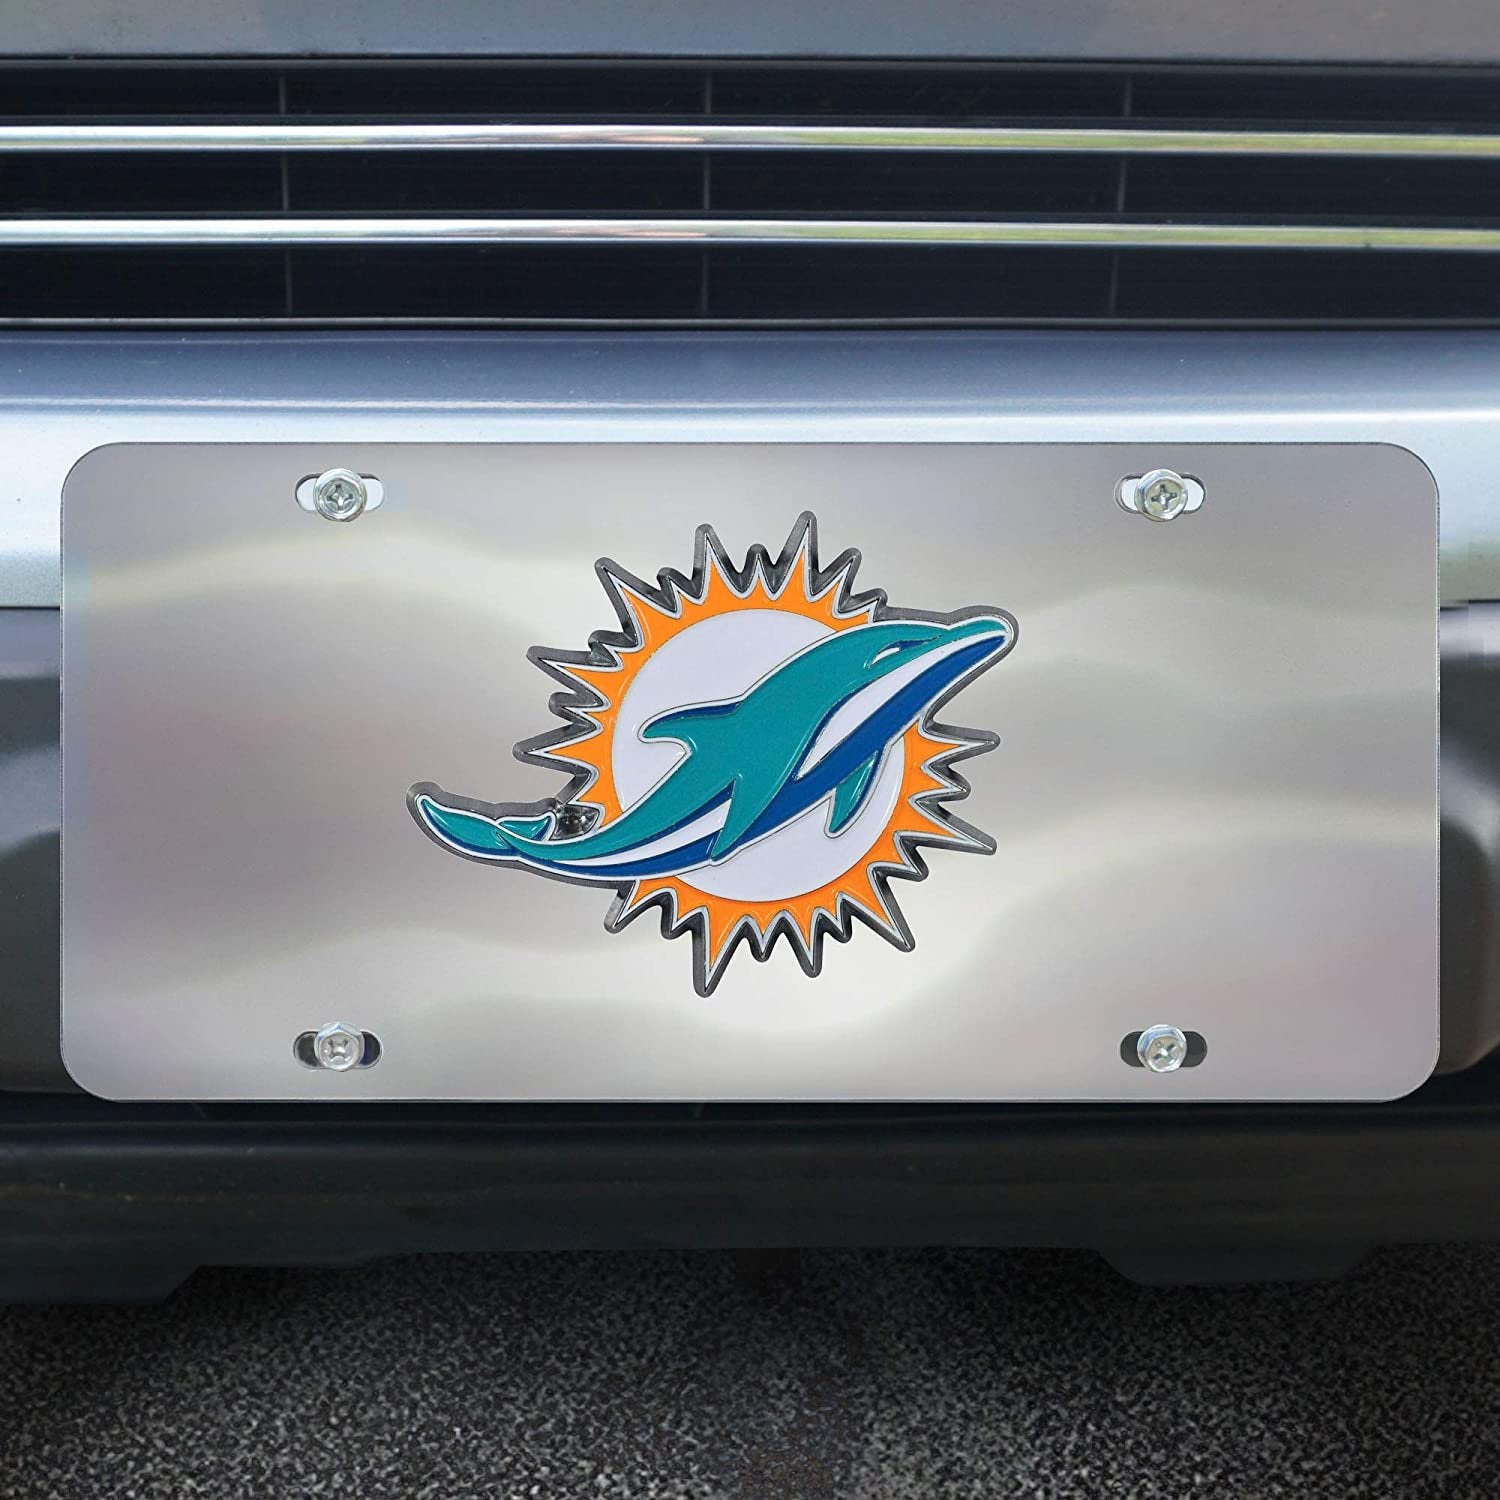 Miami Dolphins License Plate Tag, Premium Stainless Steel Diecast, Chrome, Raised Solid Metal Color Emblem, 6x12 Inch